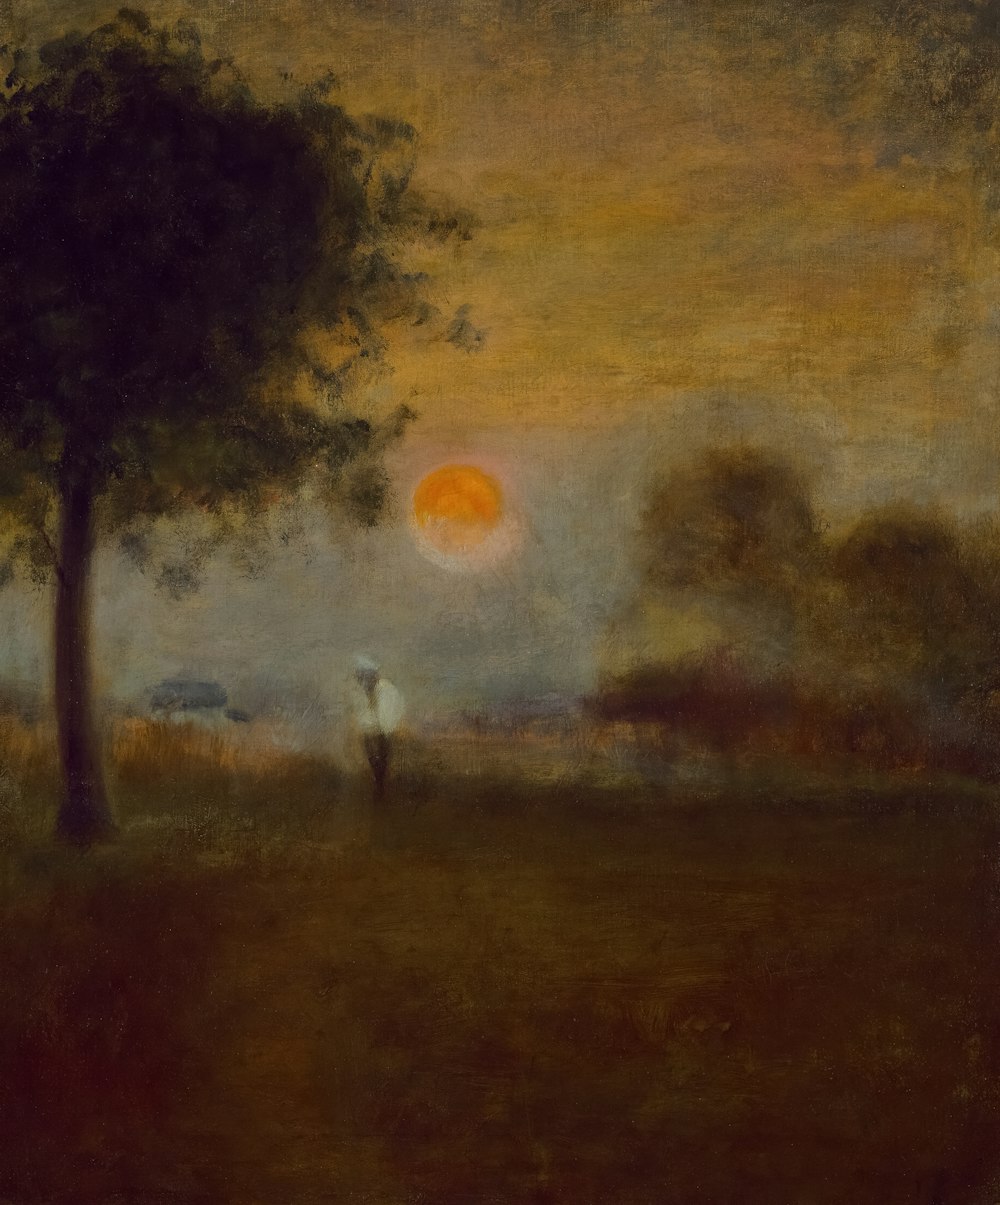 a painting of a person standing under a tree